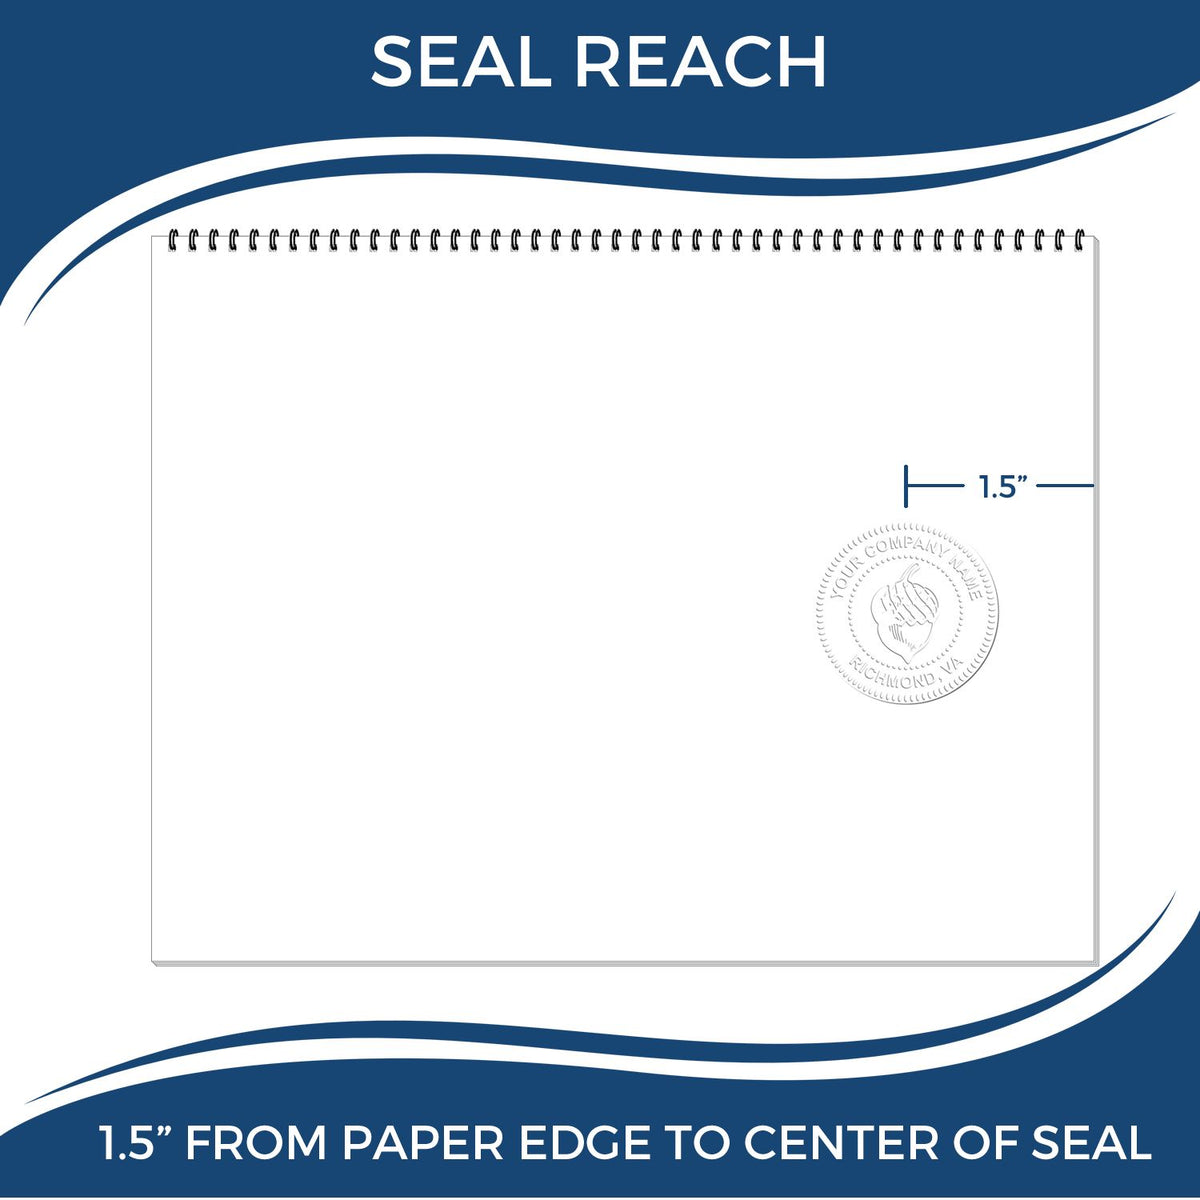 An infographic showing the seal reach which is represented by a ruler and a miniature seal image of the Handheld Mississippi Land Surveyor Seal